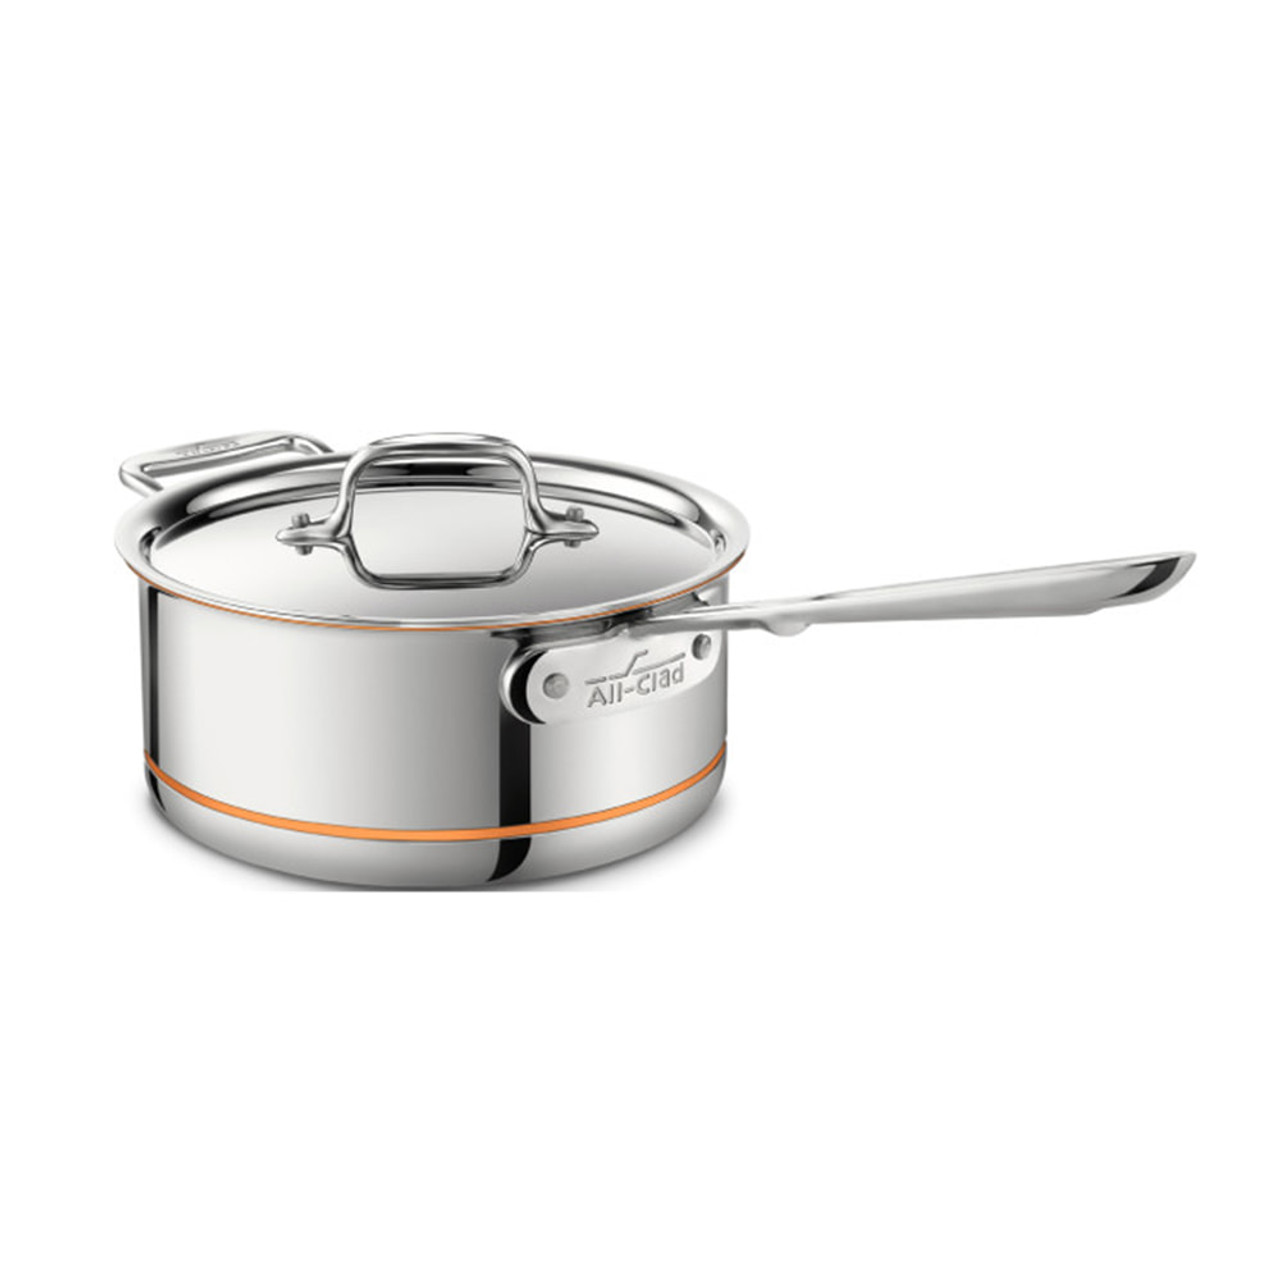 Cookware Set, All-Clad Copper Core 7-Piece Stainless Steel